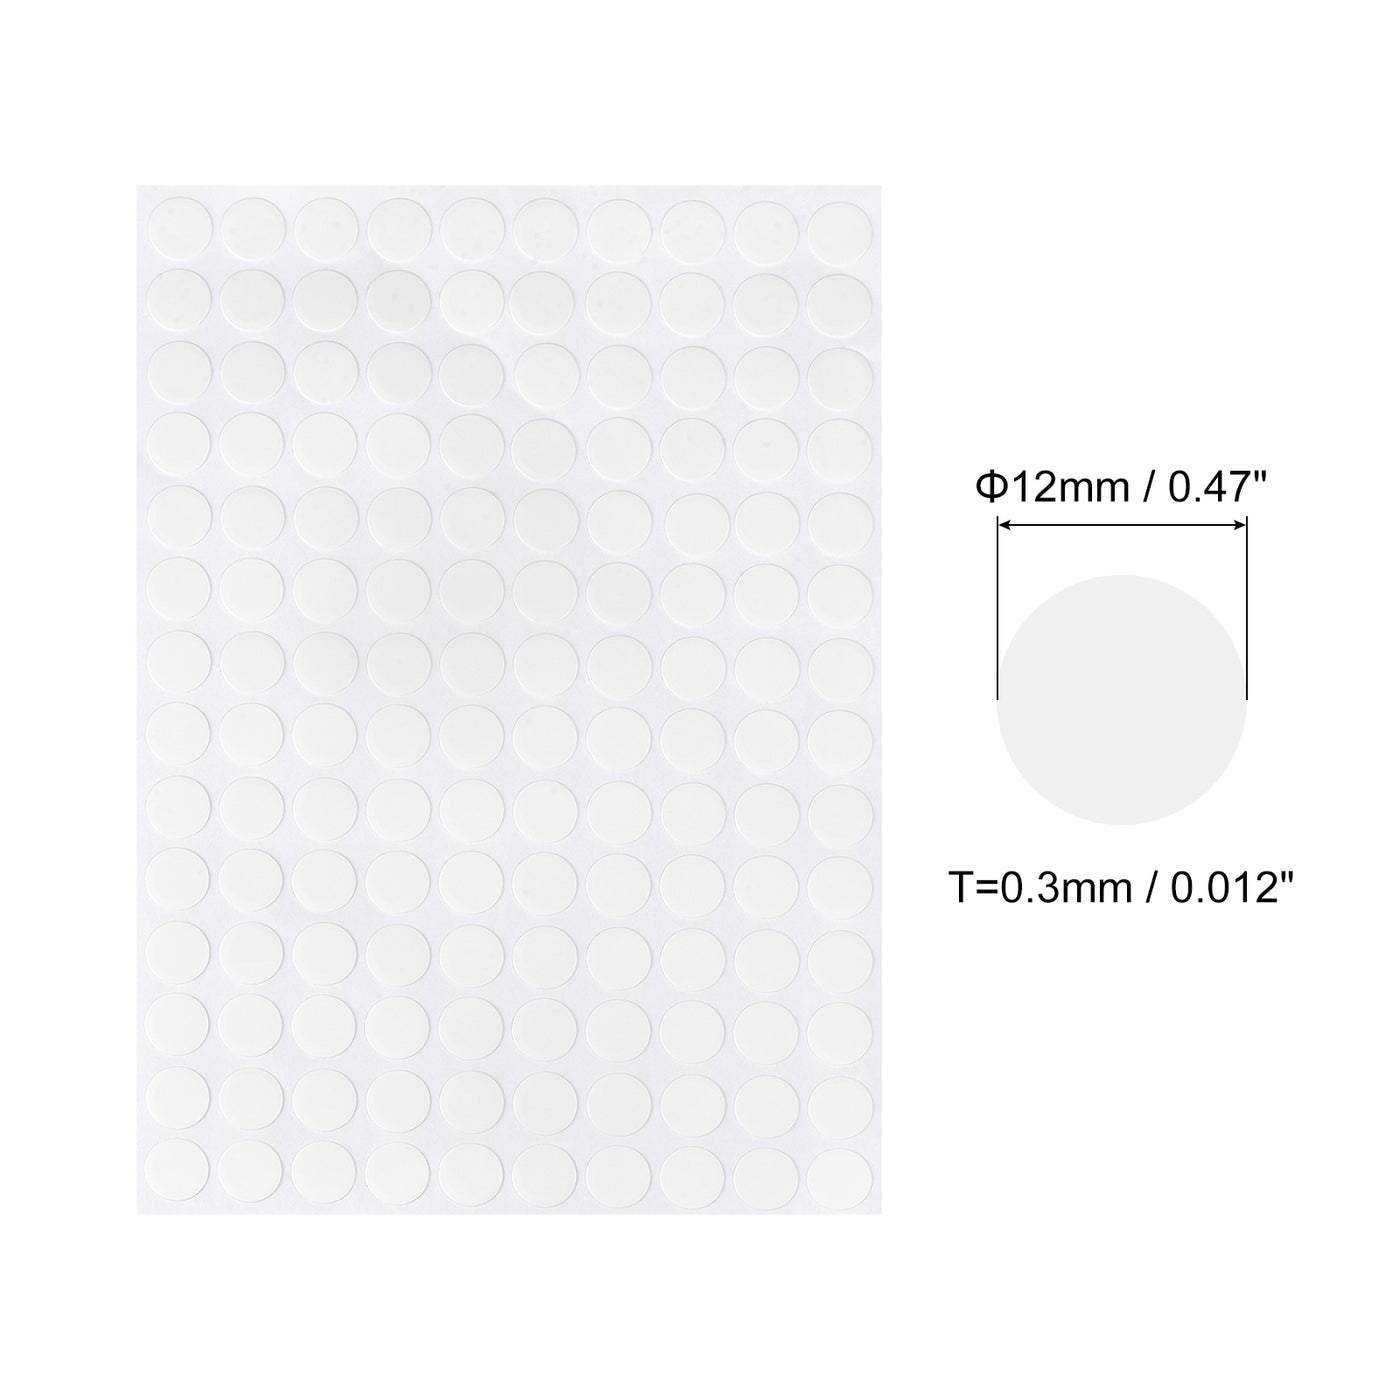 uxcell Uxcell Screw Hole Cover Stickers, 12mm Dia PVC Self Adhesive Covers Caps for Wood Furniture Cabinet Shelf Wardrobe, White 6 Sheet/840pcs